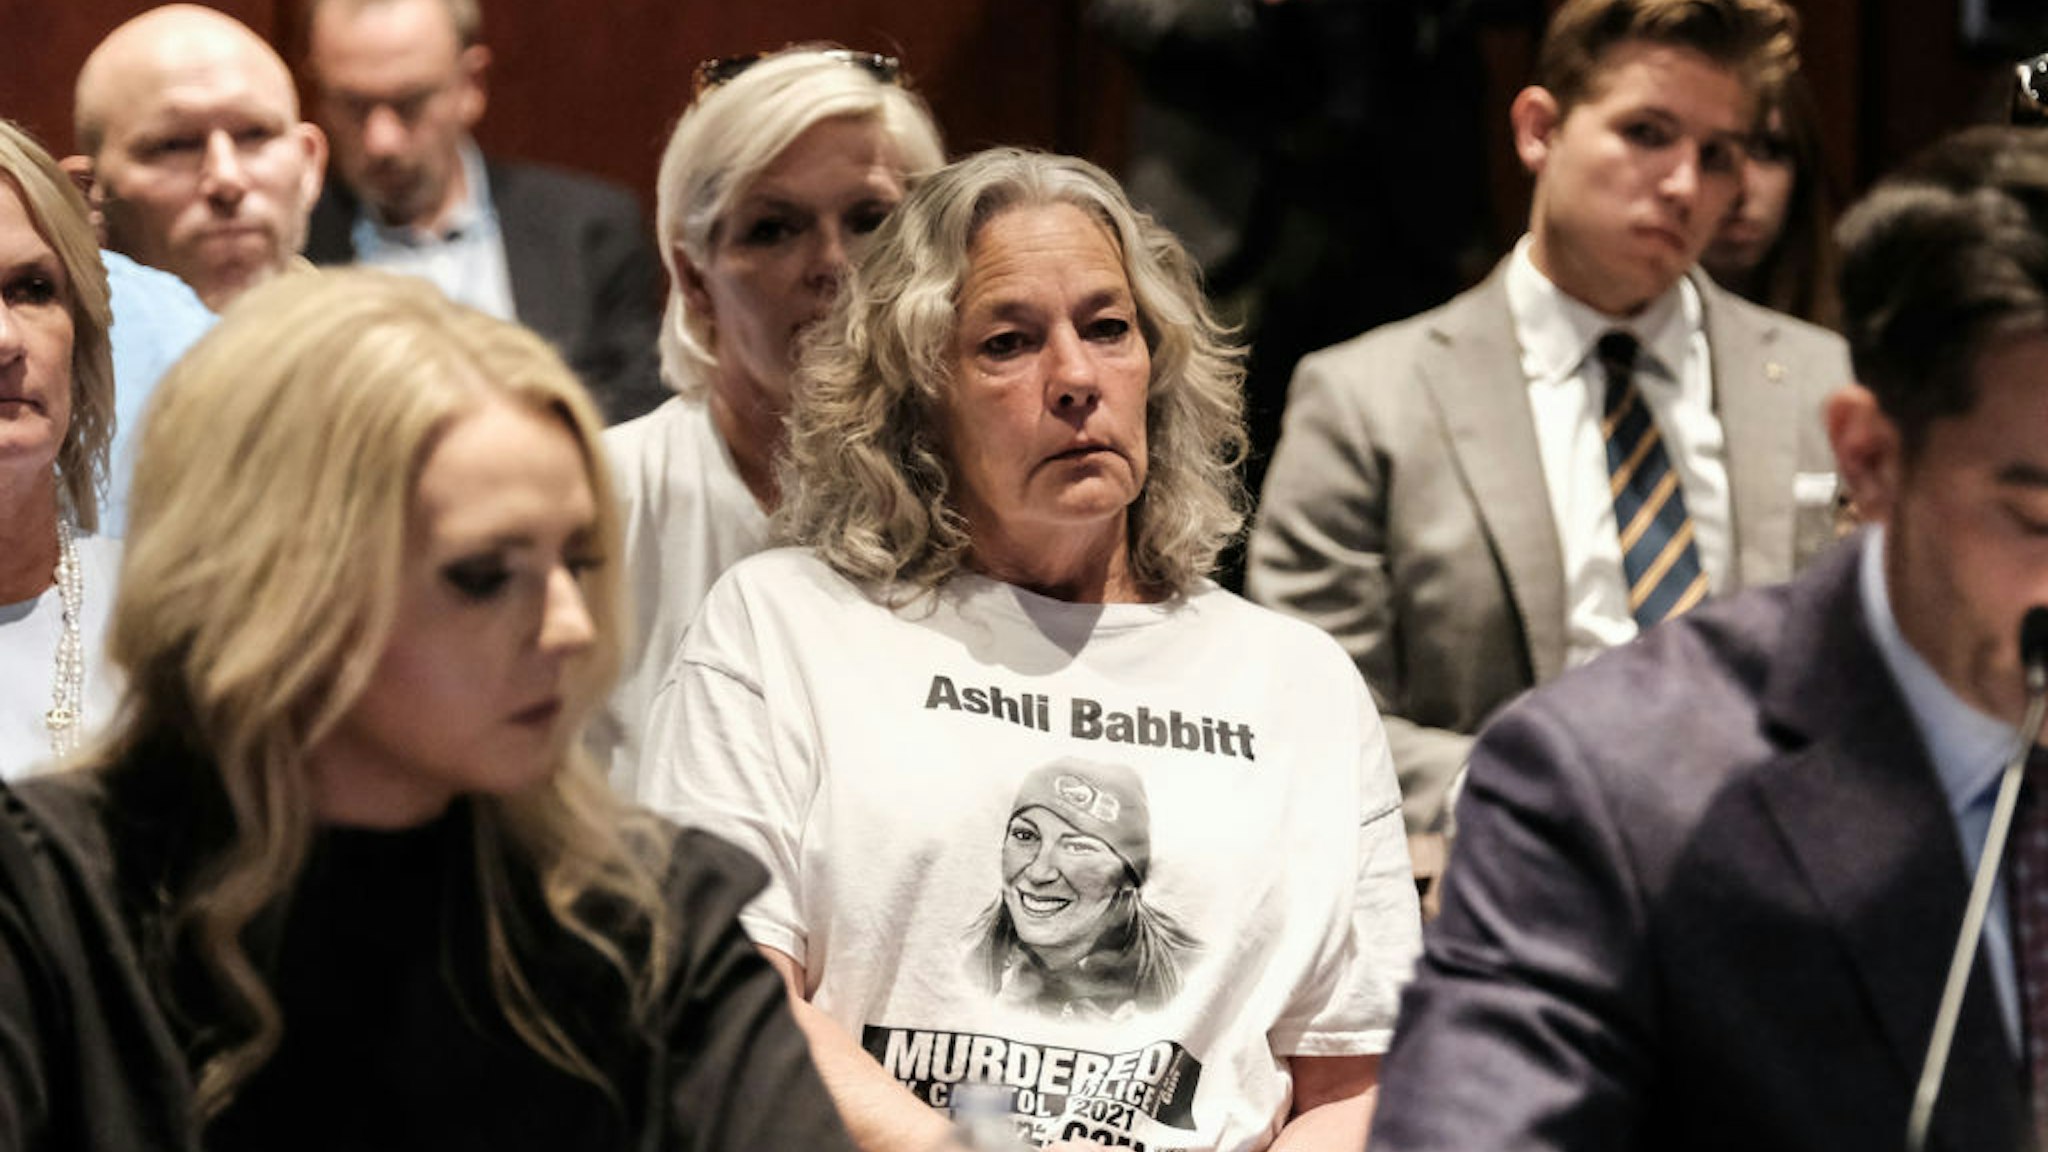 WASHINGTON, DC - JUNE 13: Michelle "Micki" Witthoeft, the mother of Ashli Babbitt attends a House January 6th field hearing held by Rep. Matt Gaetz (R-FL) in the U.S. Capitol on June 13, 2023 in Washington, DC. Babbitt was shot and killed after entering the Capitol during the January 6th riot. (Photo by Michael A. McCoy/Getty Images)